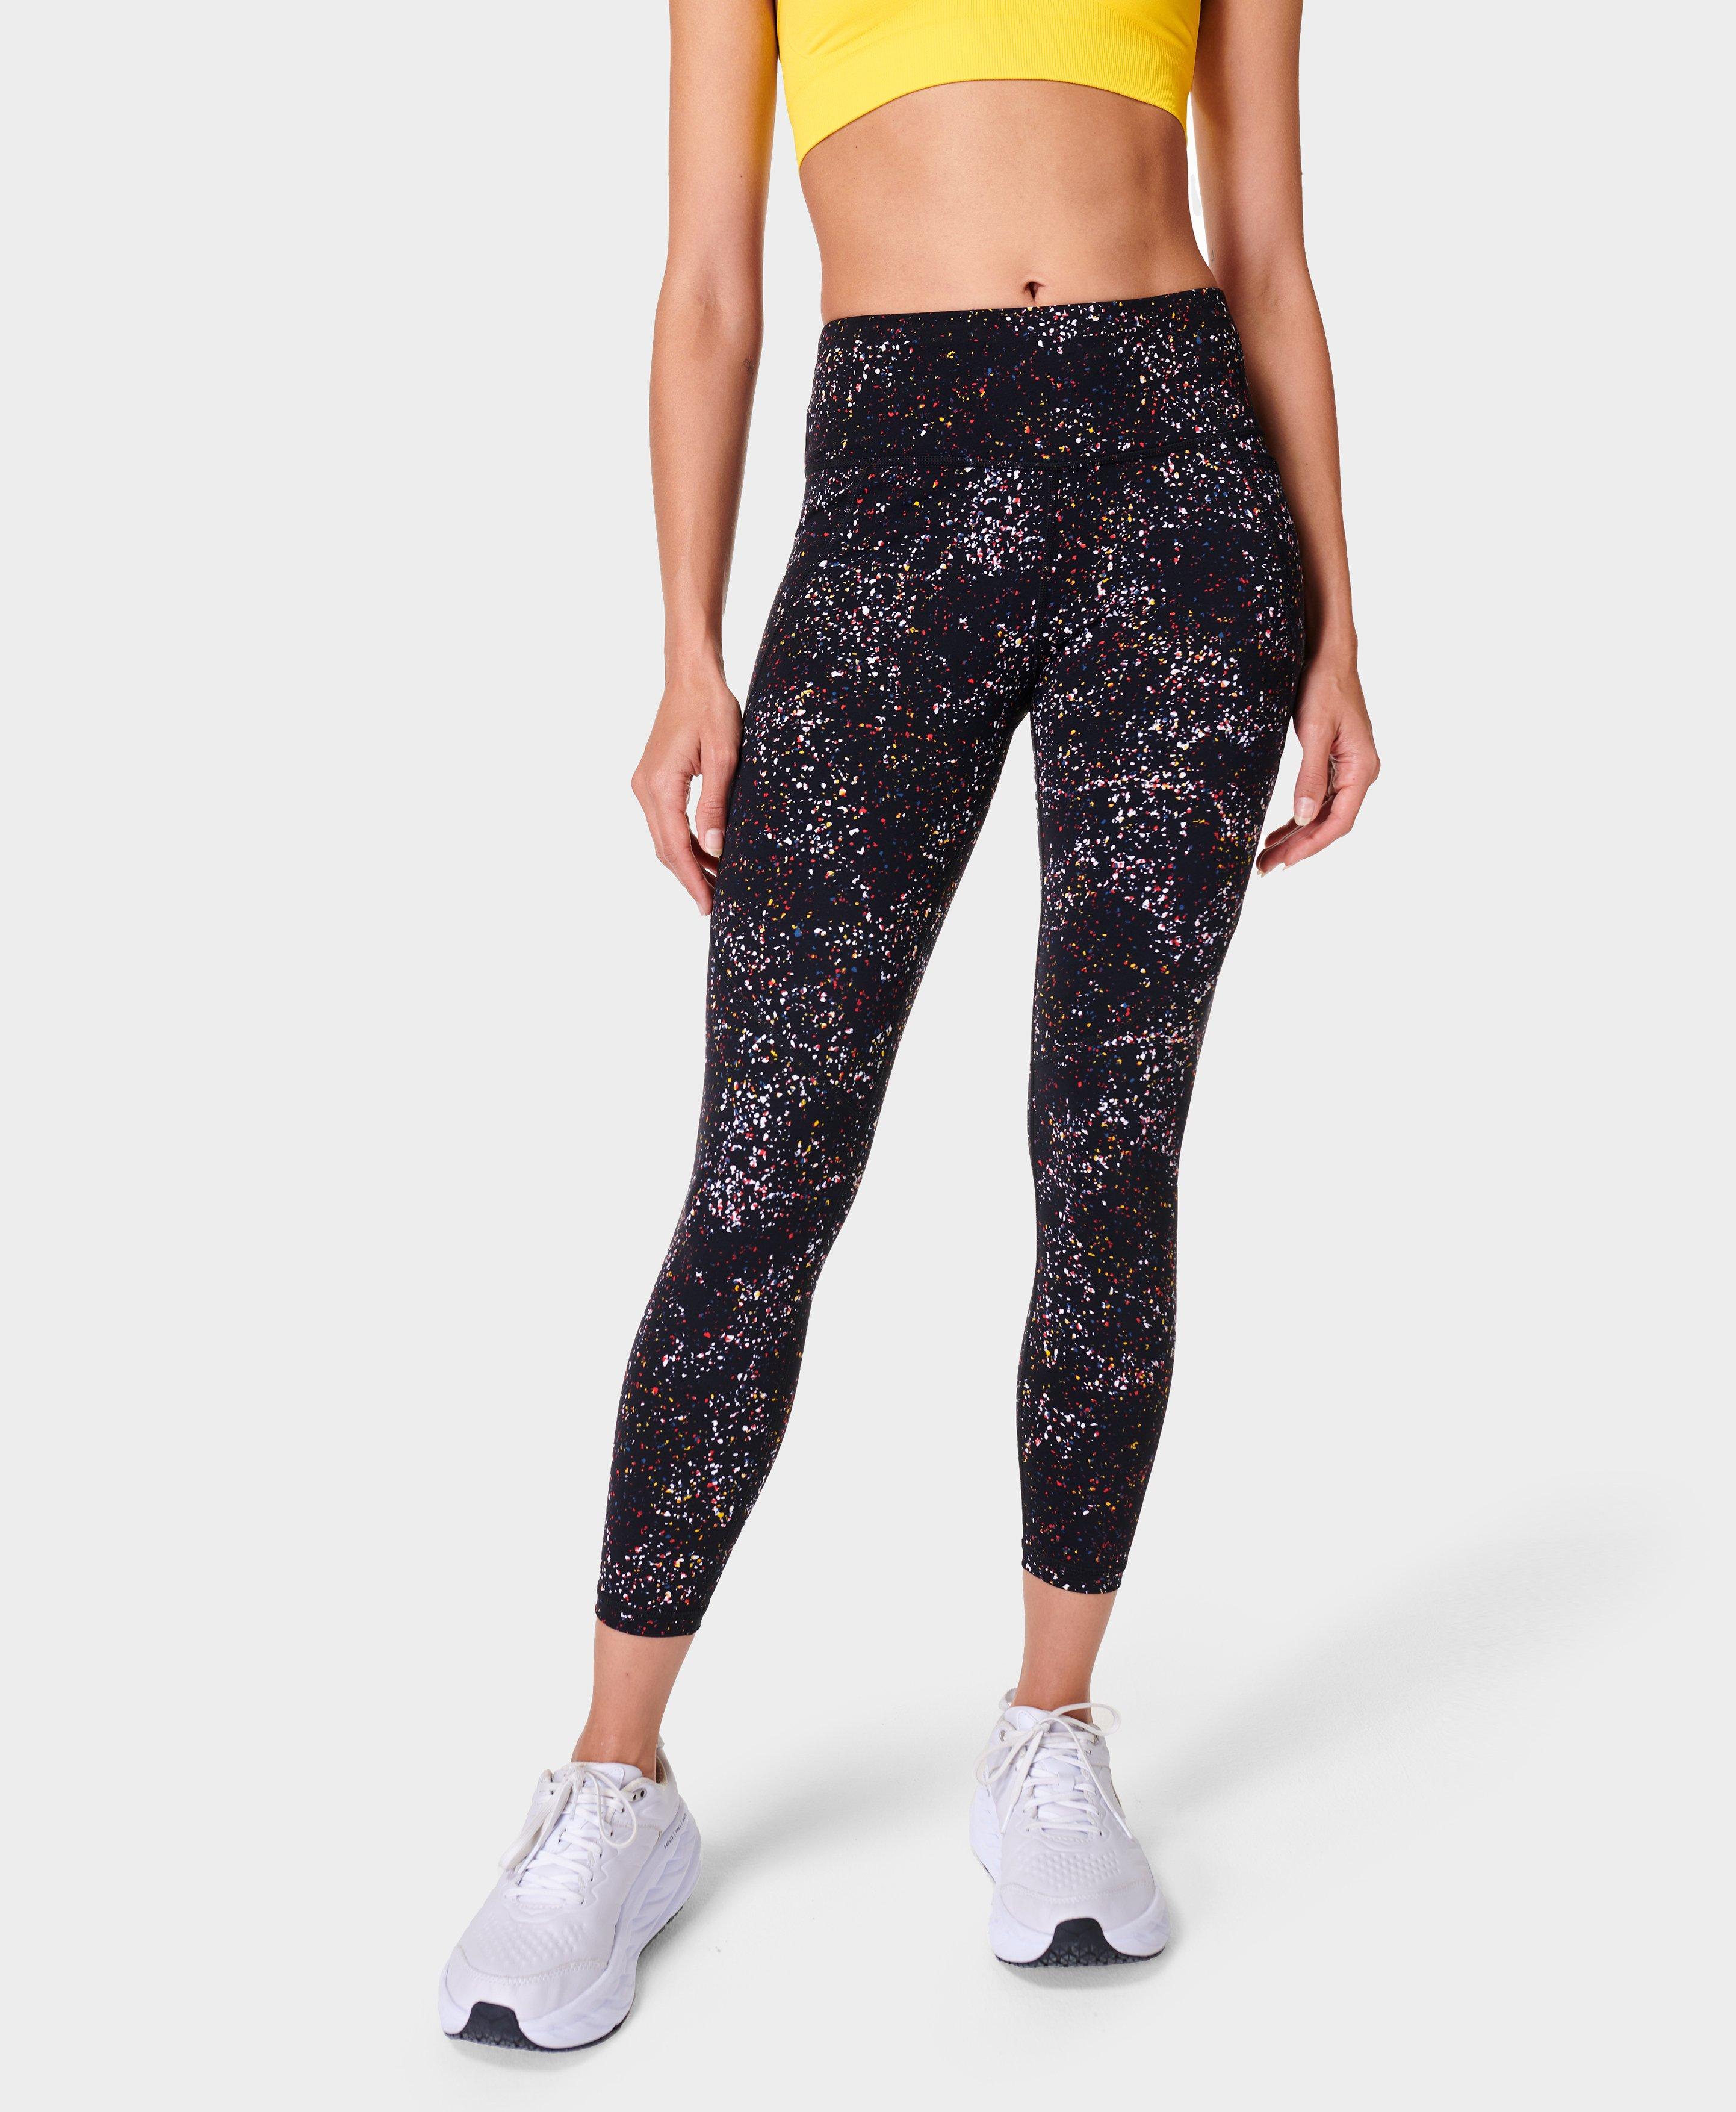 Sweaty Betty Sale Bottoms - Shop up to 60% off